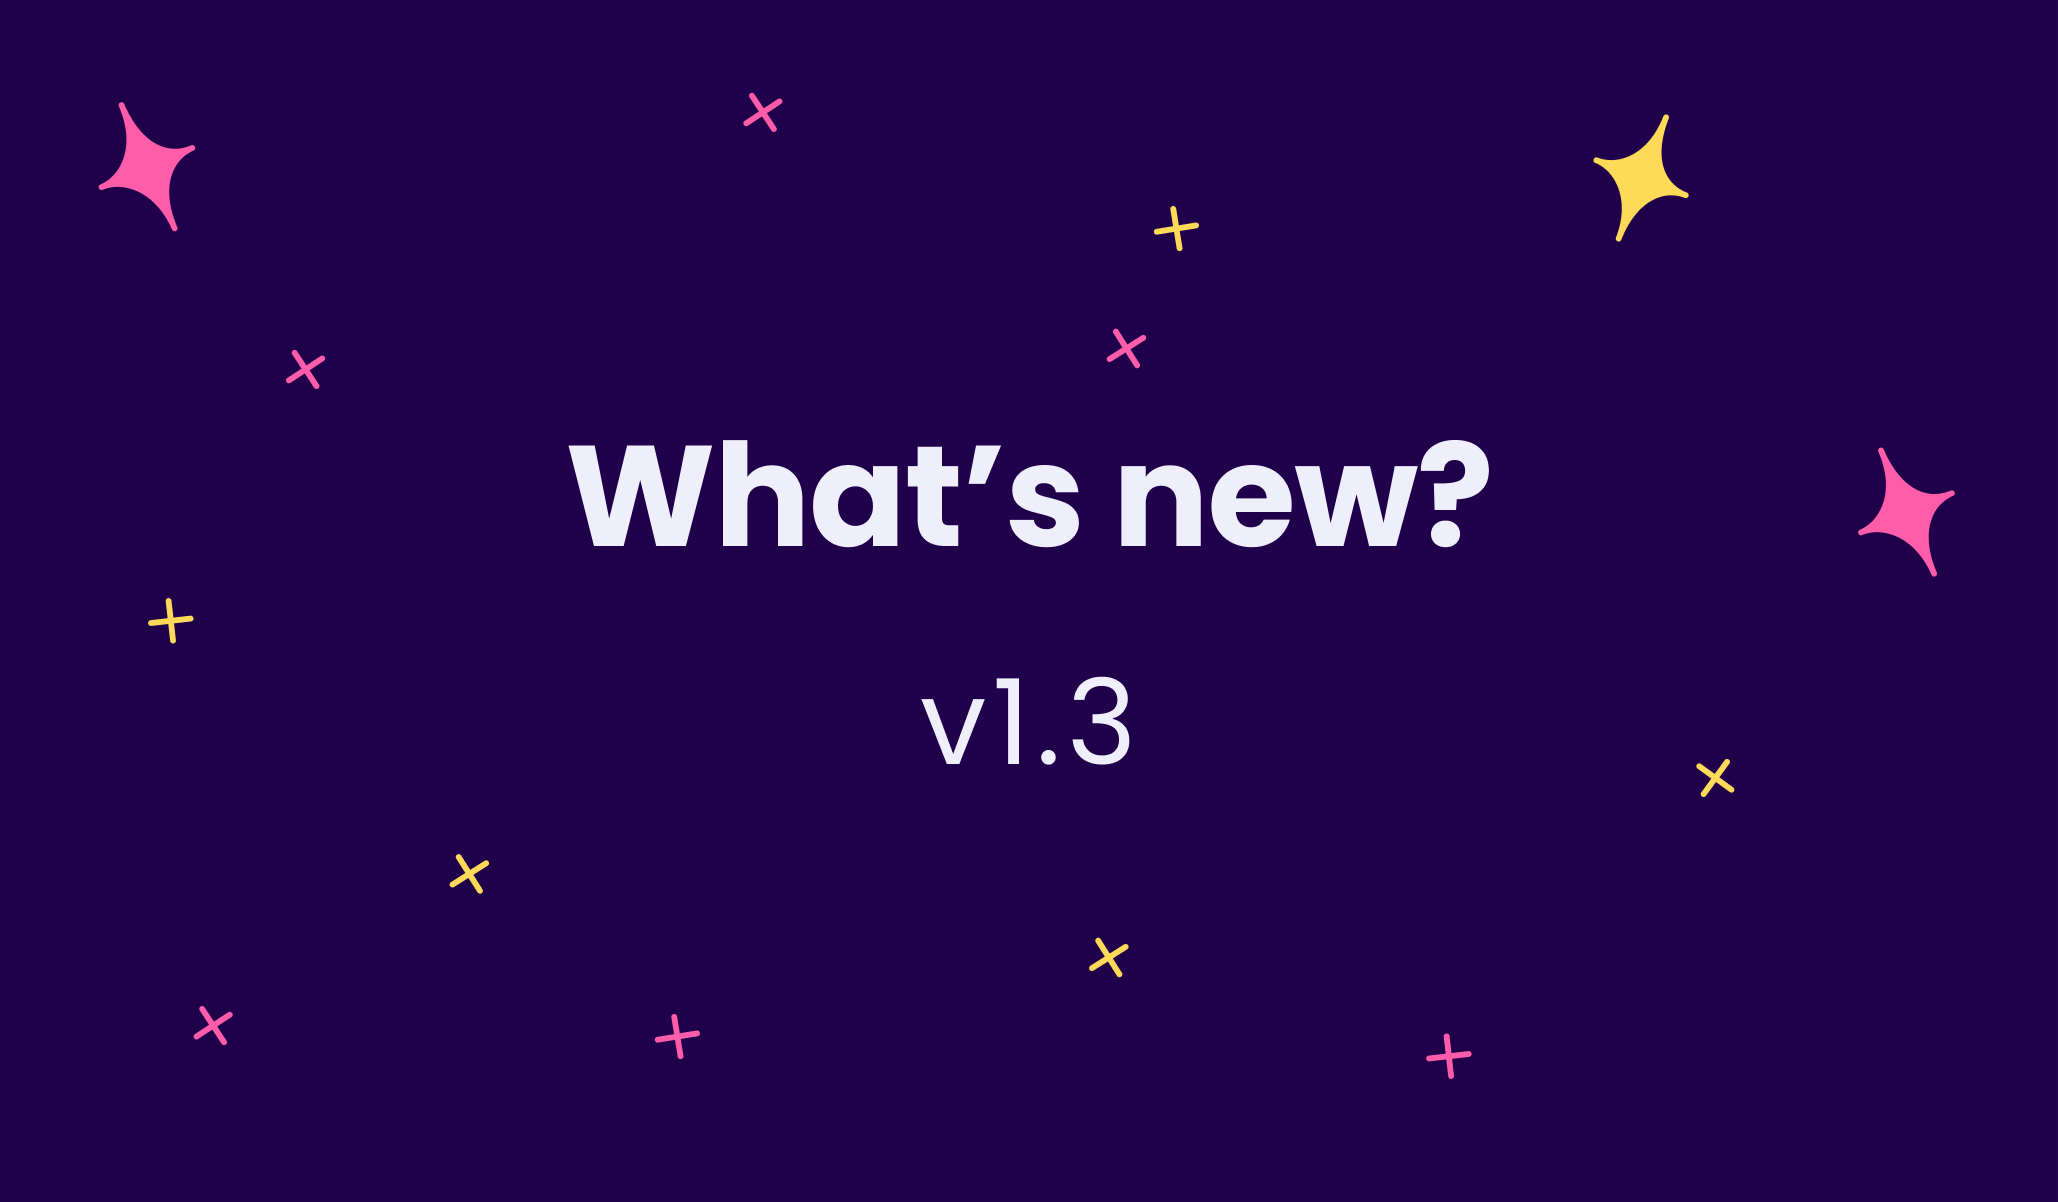 What’s new in v1.3?